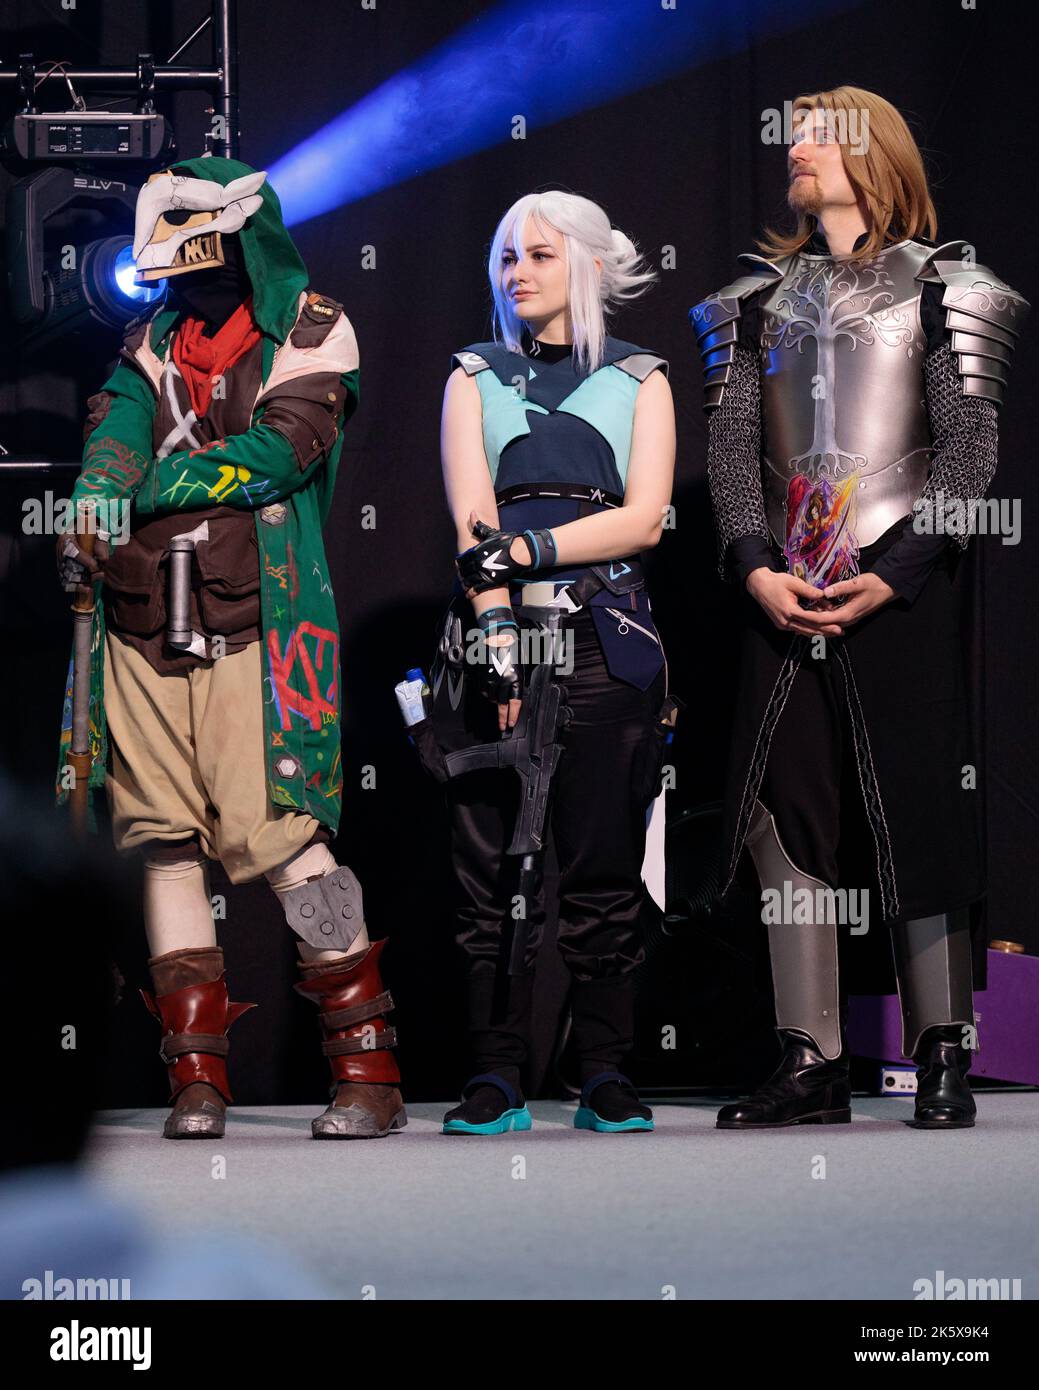 Poland, Poznan - October 09, 2022: Poznan Game Arena, video game characters, Valorant Jett Cosplay cosplay. Stock Photo